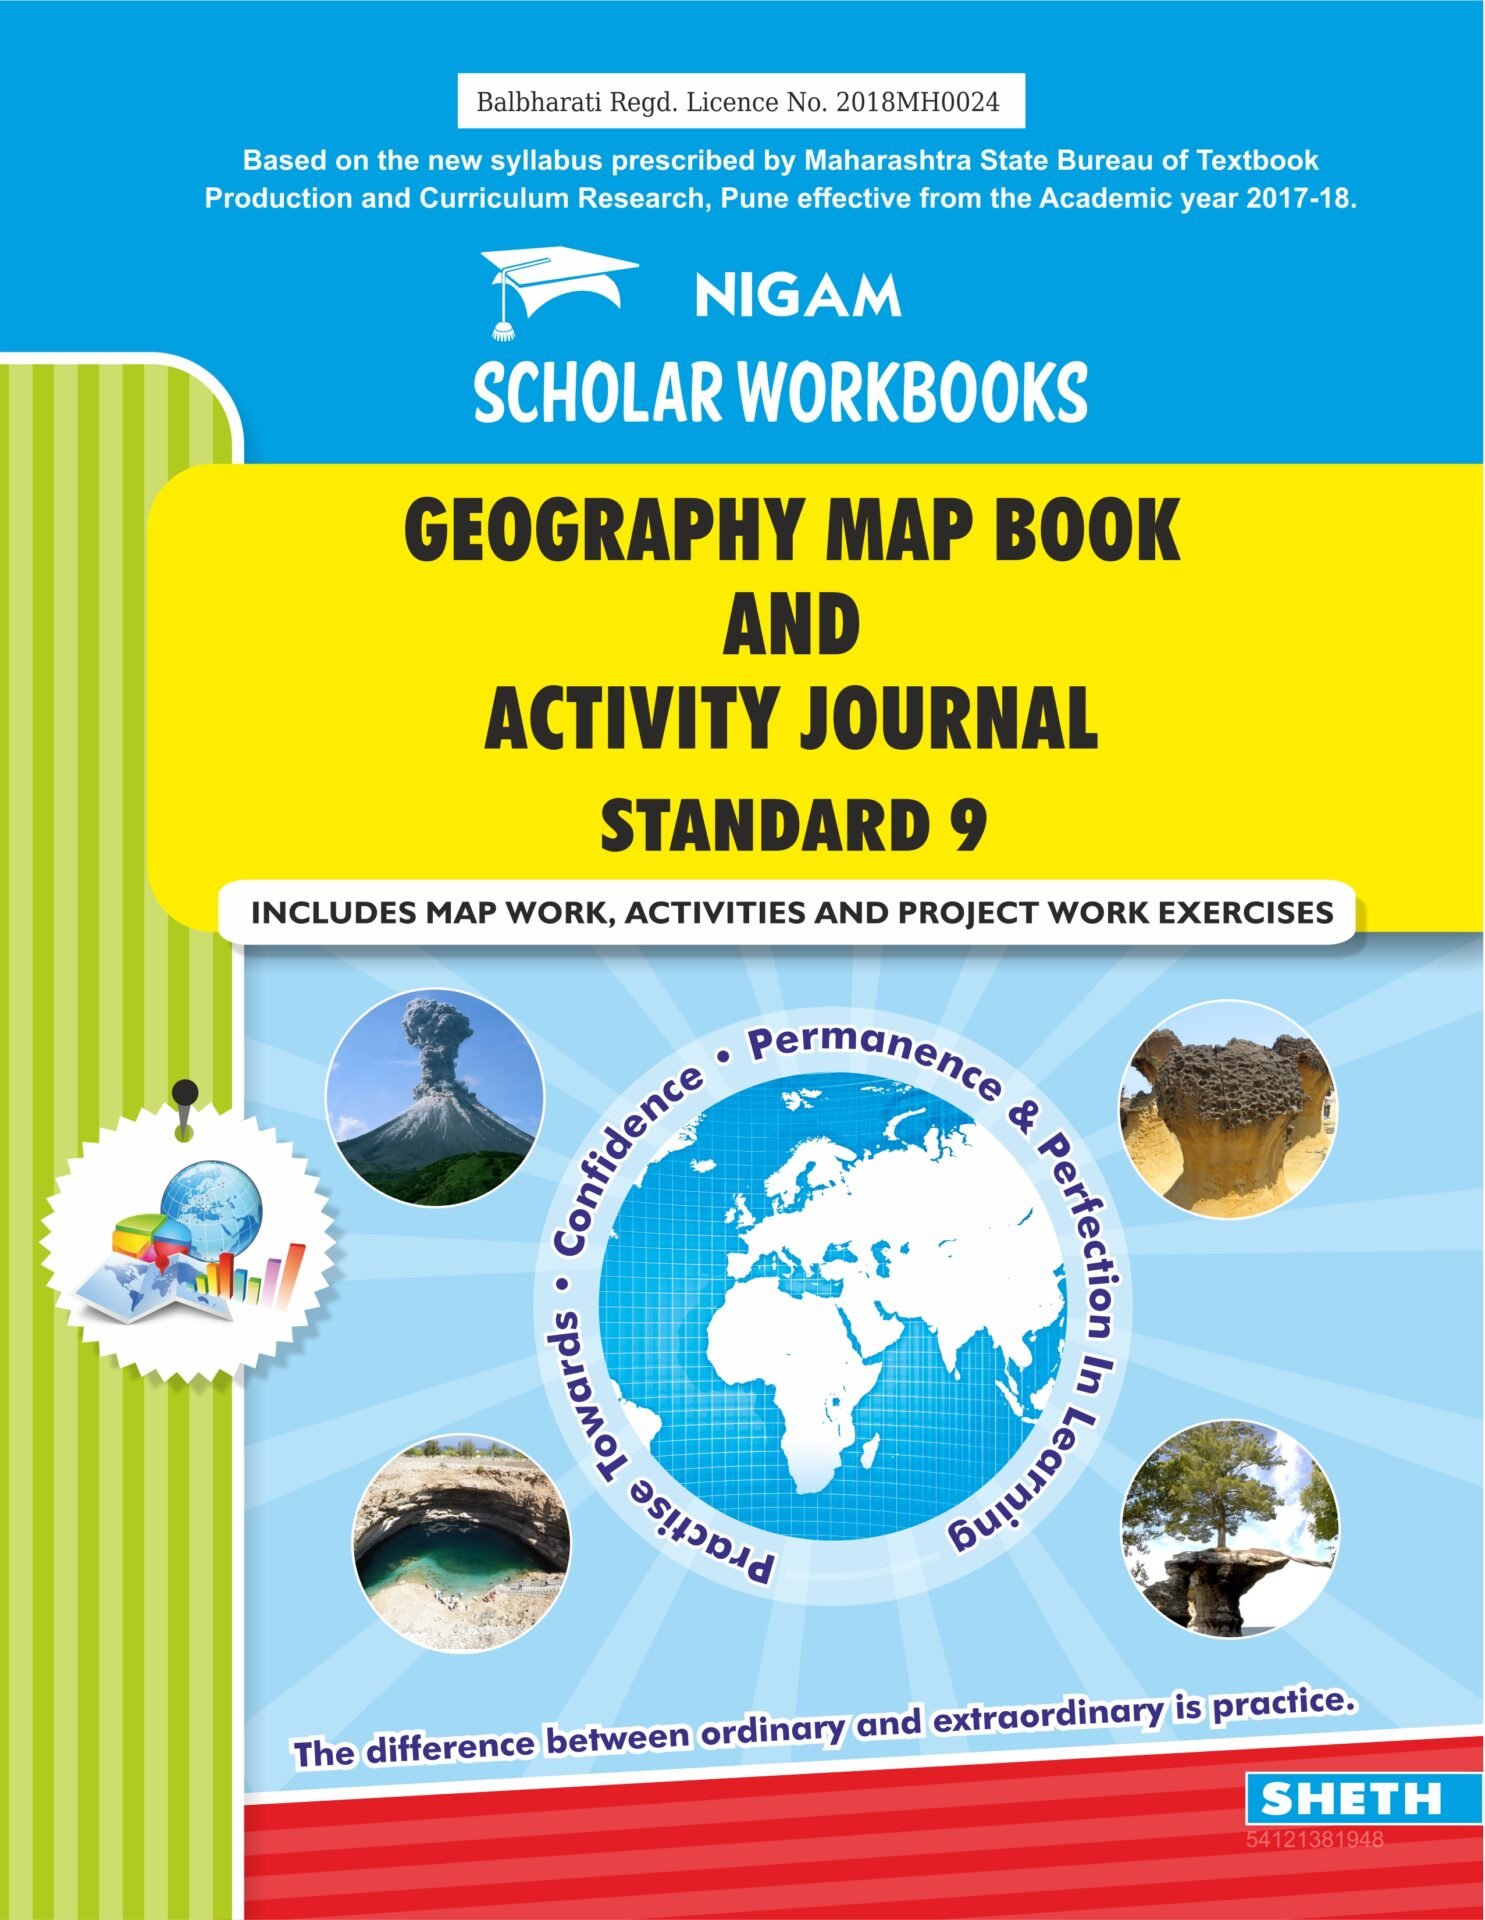 CCE Pattern Nigam Scholar Workbooks Geography Map Book And Activity Journal Standard 9 1